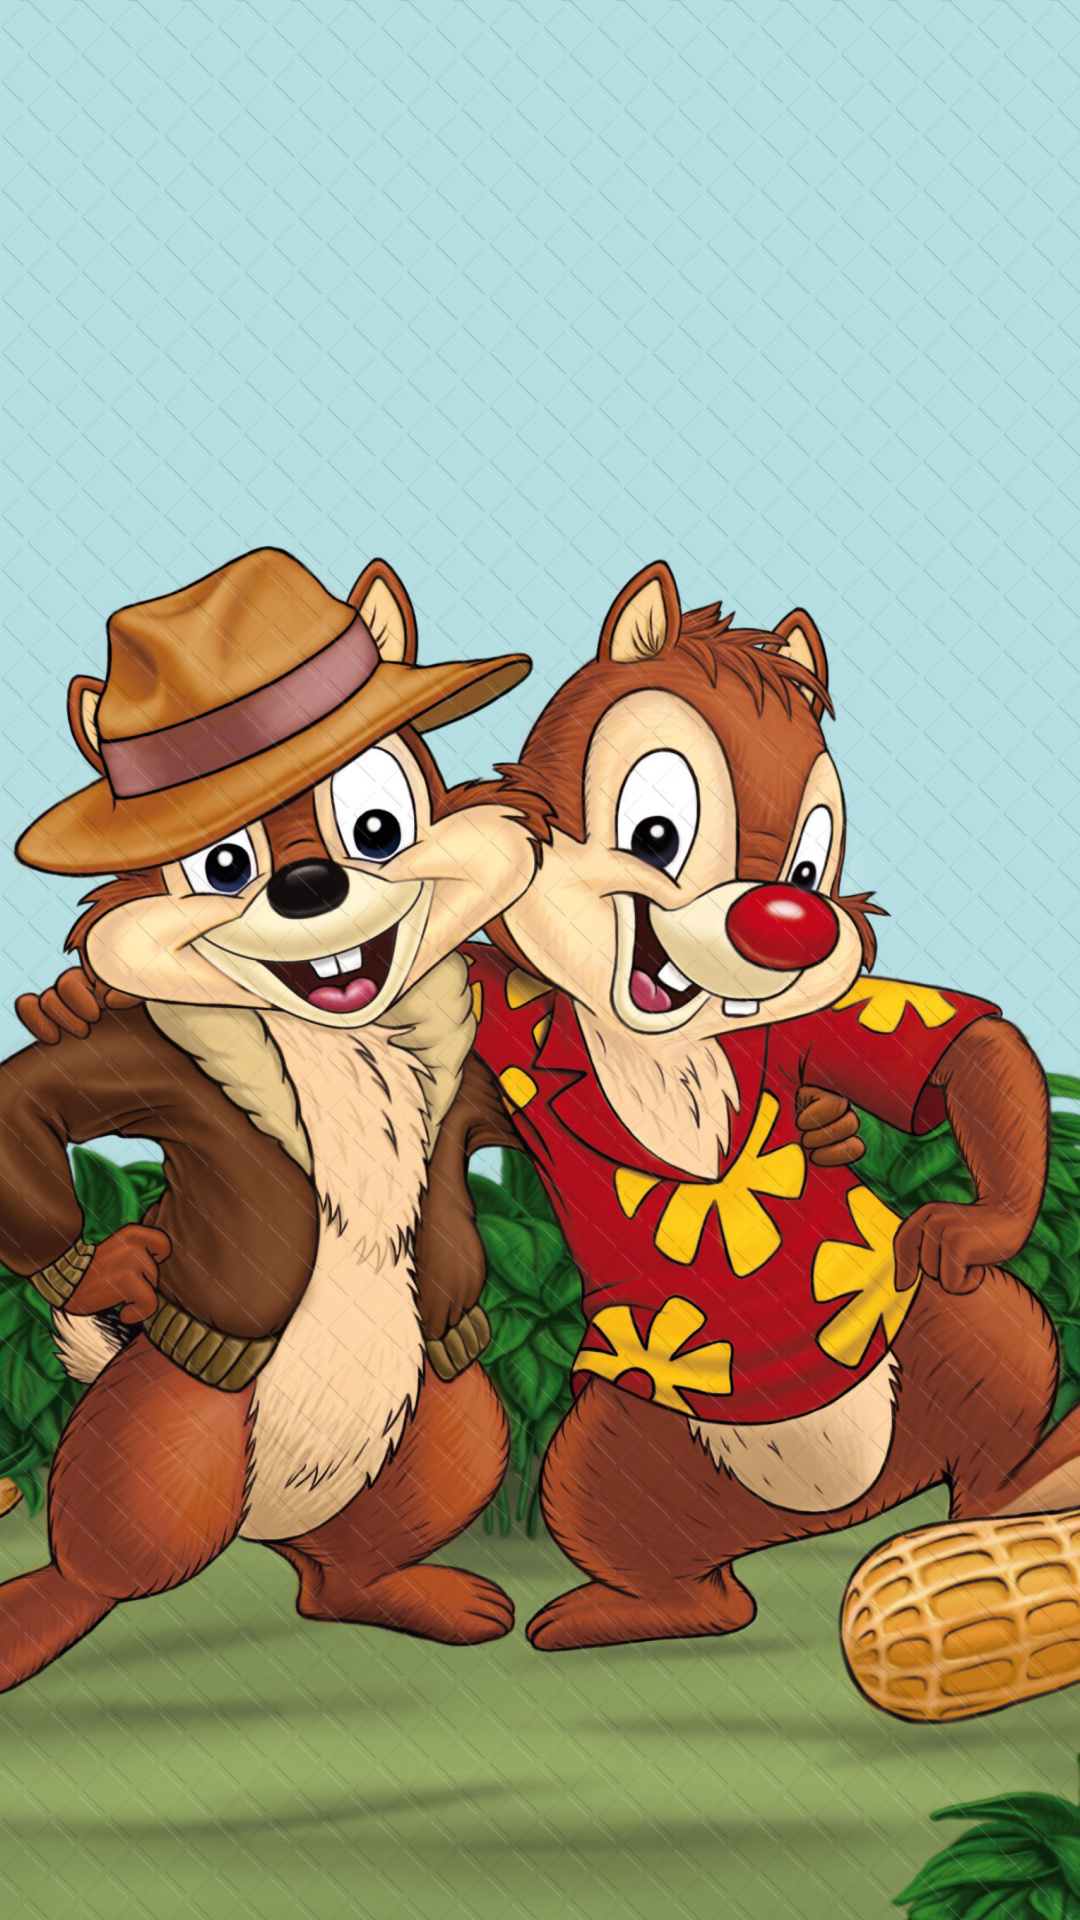 Chip and Dale Rescue Rangers 3 wallpaper 1080x1920